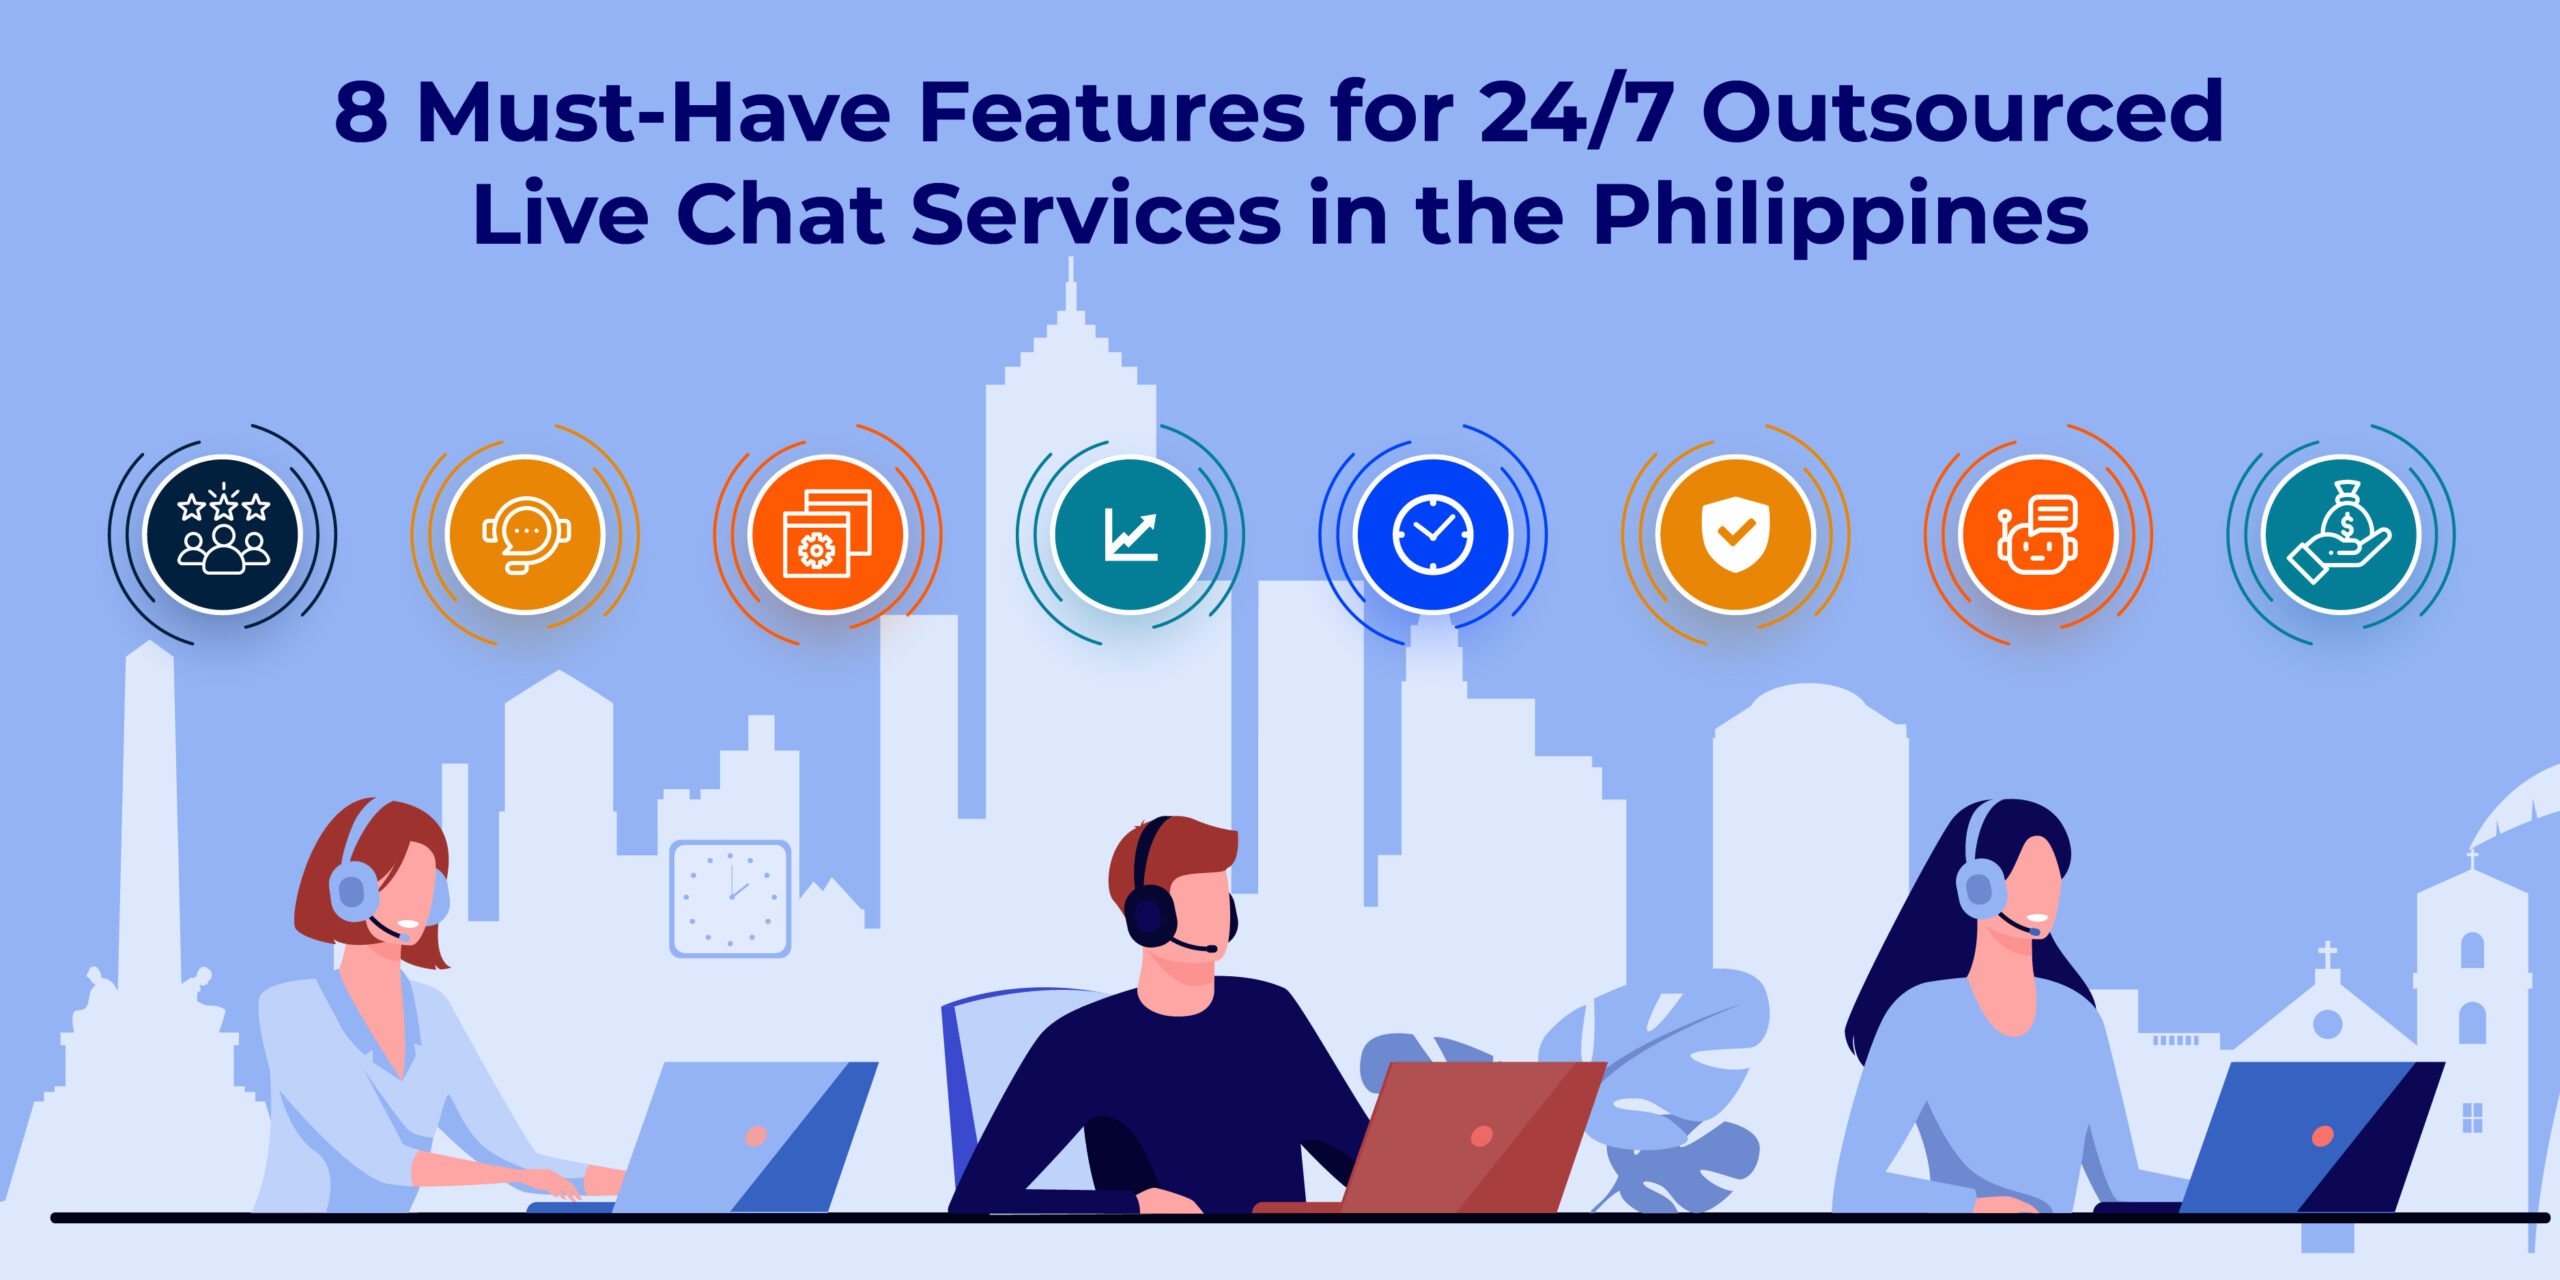 Wow_8 Must_Have Features for 24_7 Outsourced Live Chat Services in the Philippines